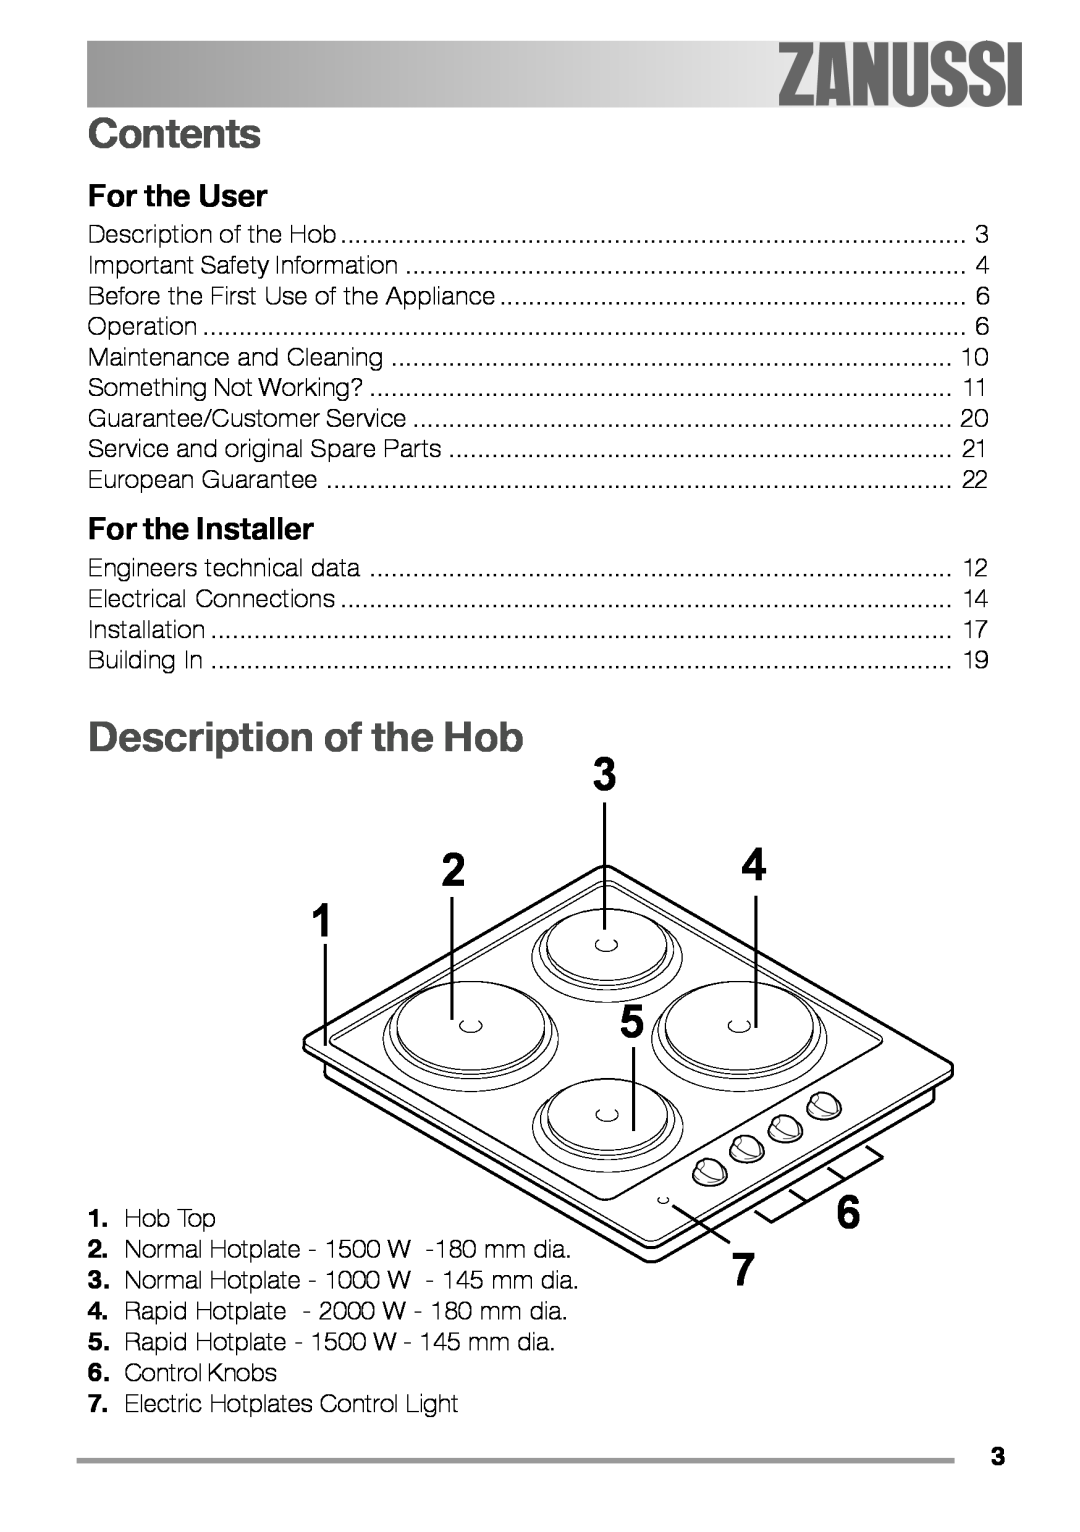 Zanussi ZEL 640 manual Contents, Description of the Hob, For the User, For the Installer 